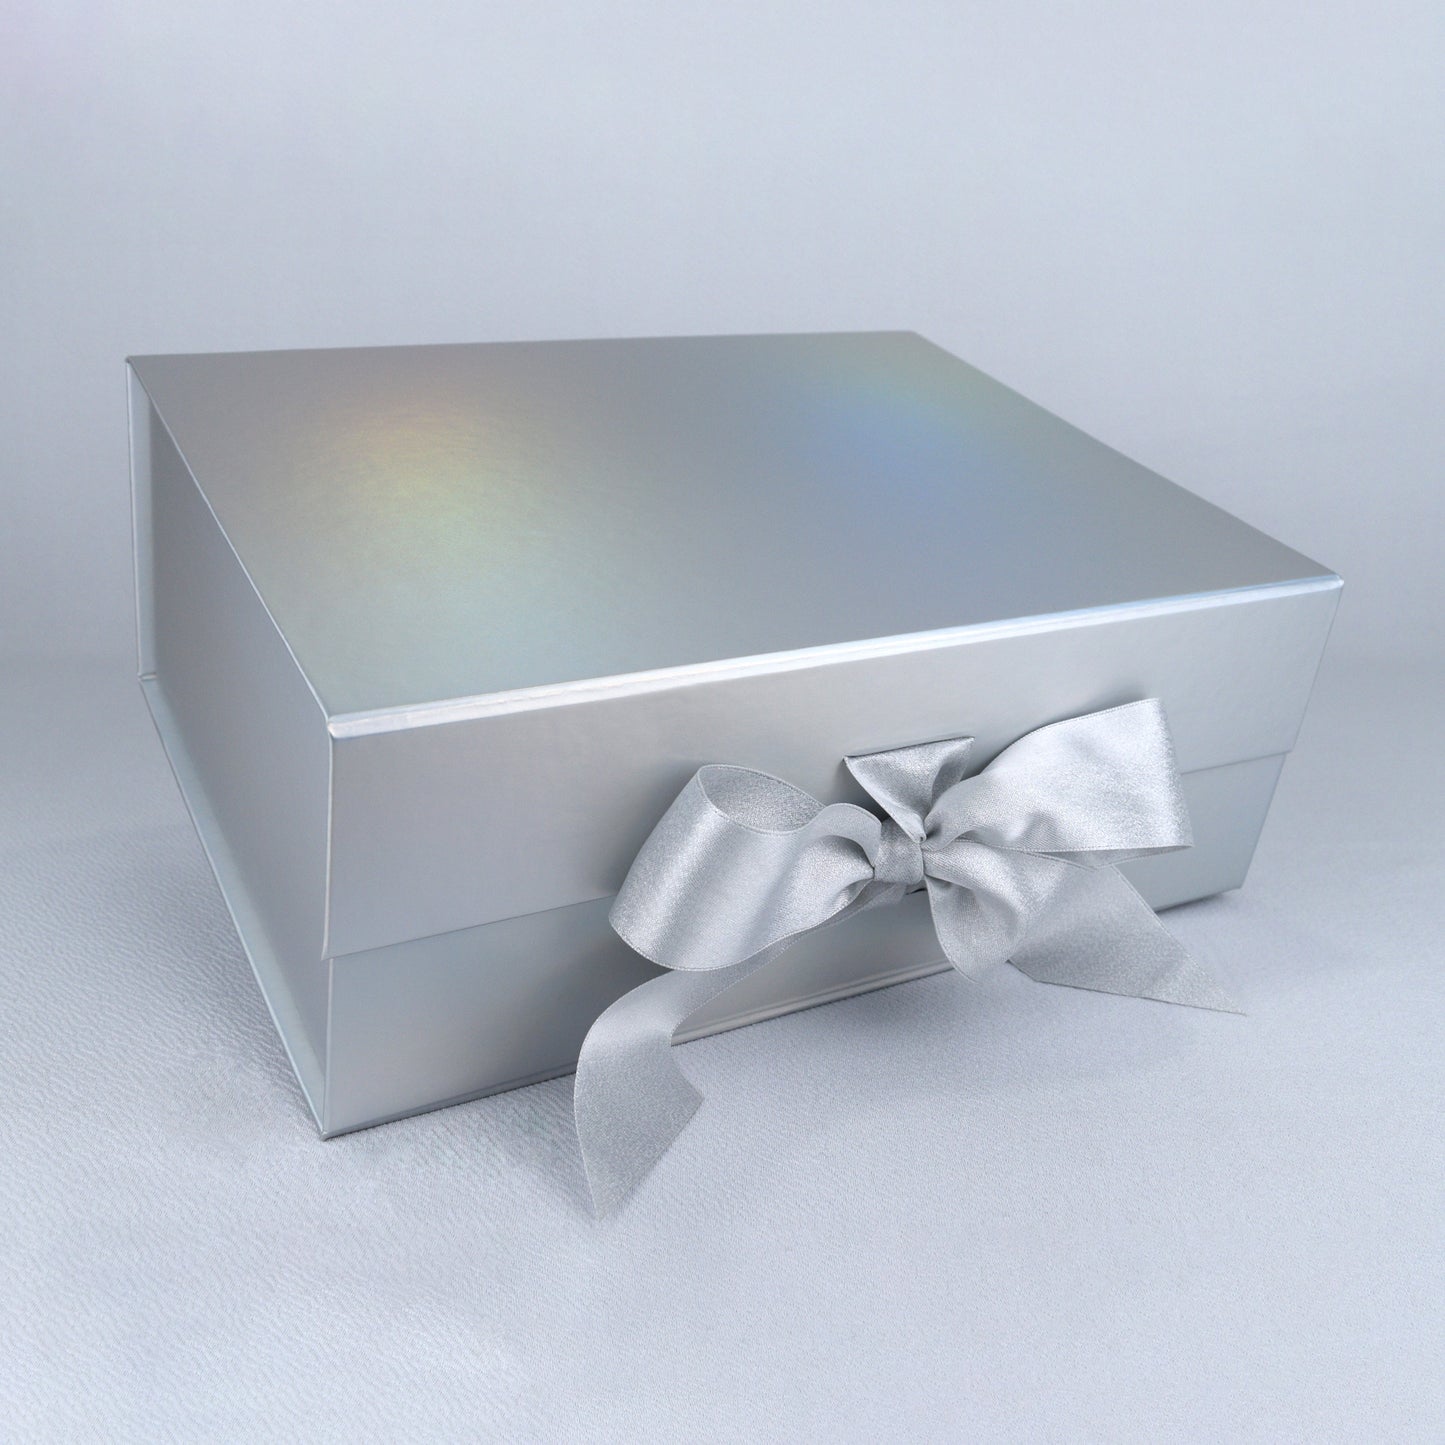 LARGE Premium Gift Box with Satin Ribbon and Magnetic Closure (11" x 8.75" x 4.37")